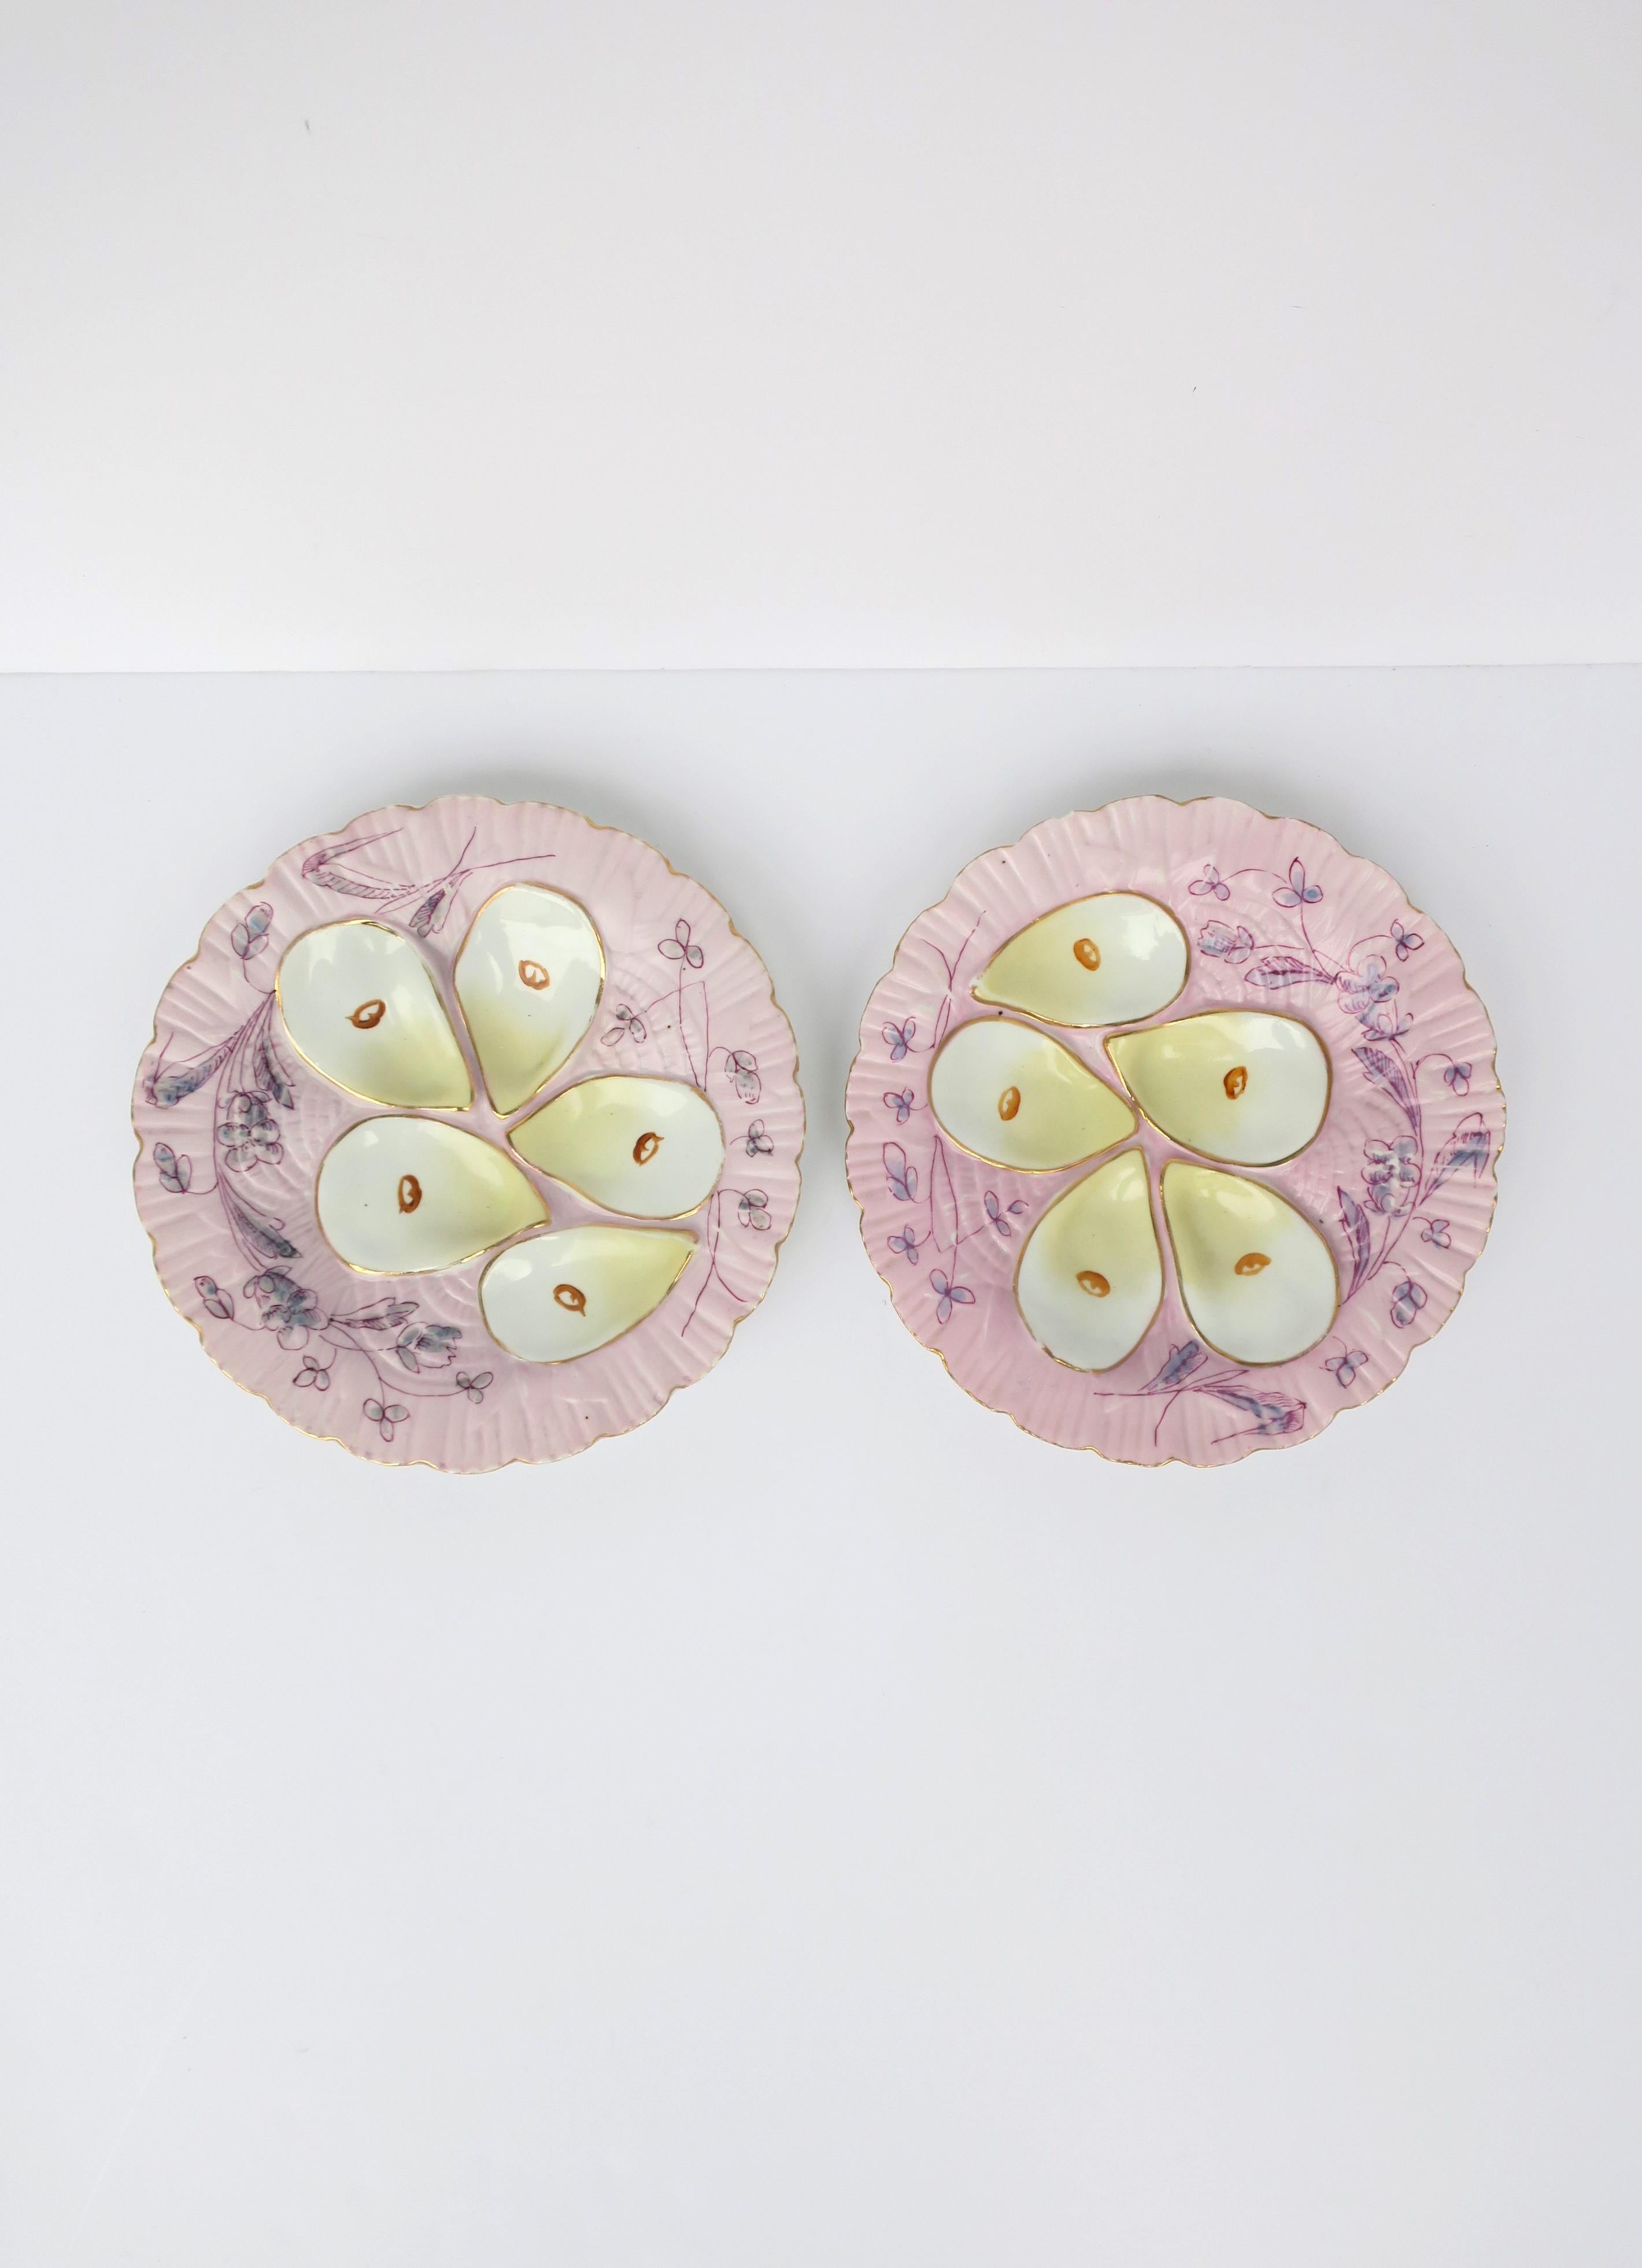 A beautiful set of two (2) antique French porcelain oyster plates, circa early-20th century, France. Plates are white porcelain decorated in pink and light purple hues, organic flower and leaf design around, and 5 wells edged in gold with a